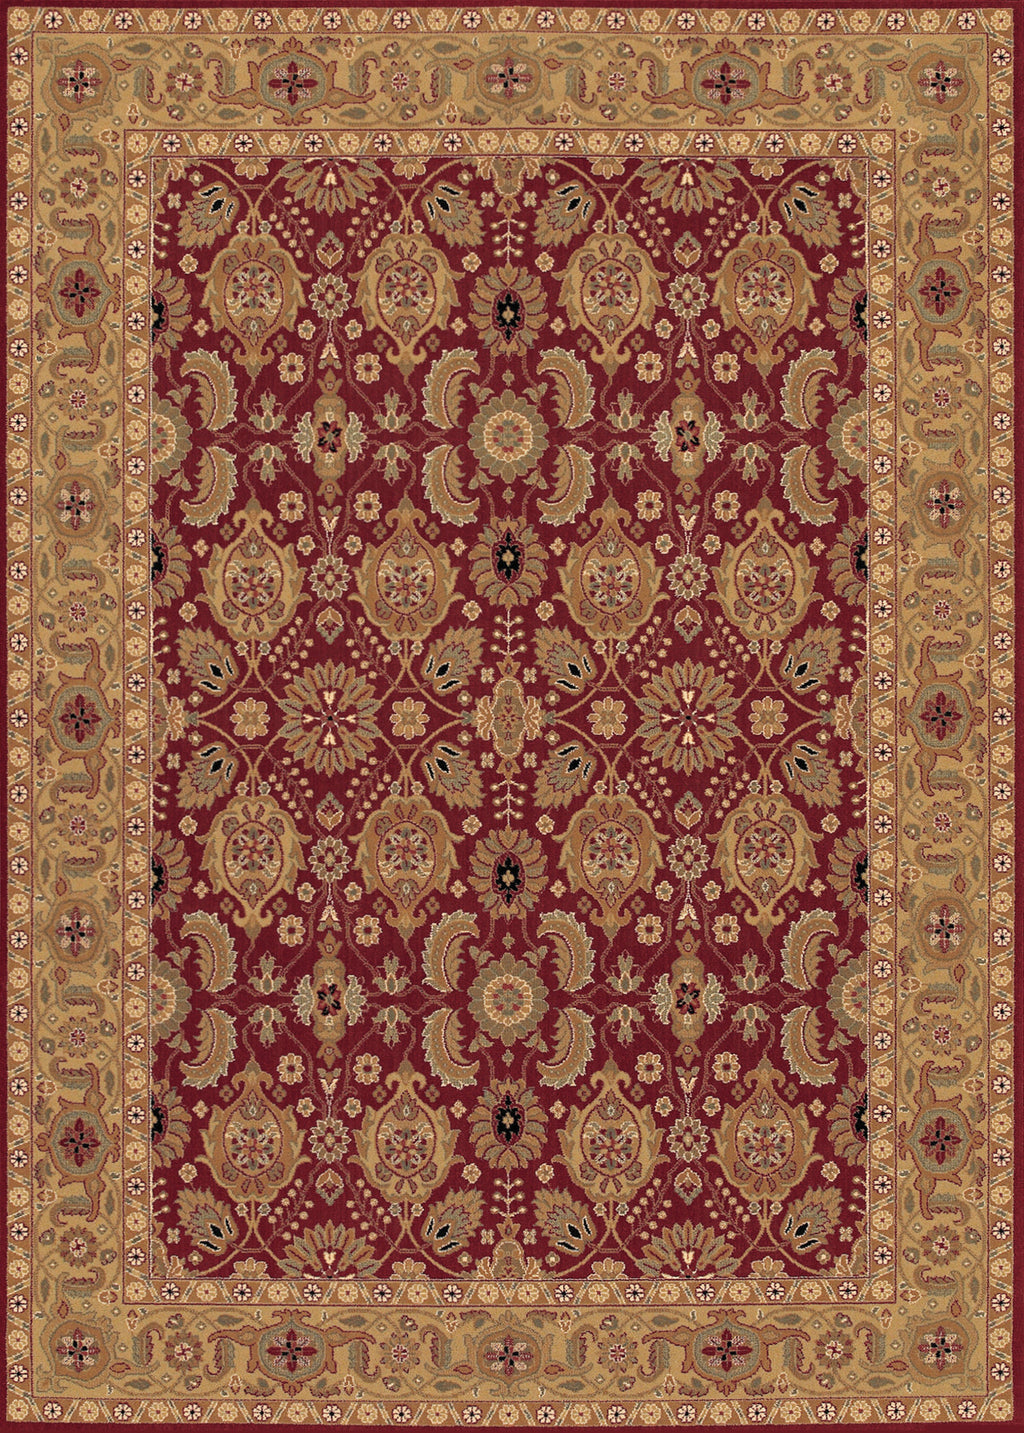 Couristan Royal Kashimar All Over Vase Persian Red Machine Loomed Area Rug